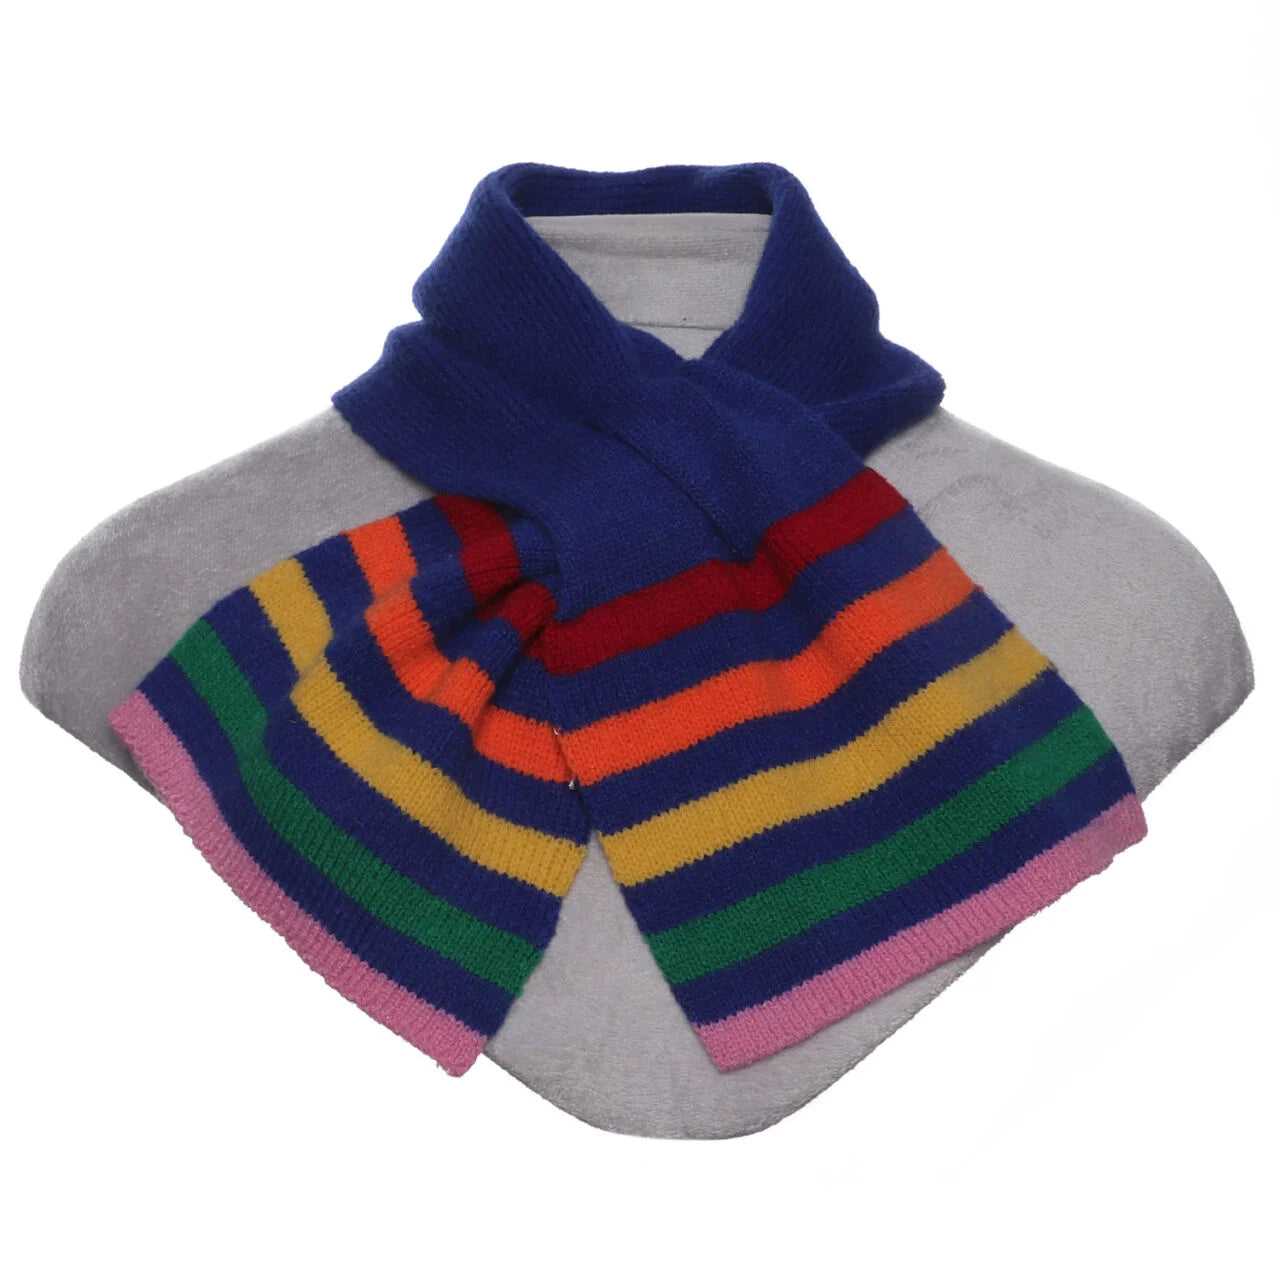 Fab Gifts | Winter Accessories Winter Pull Through Scarf Knit Rainbow Blue by Weirs of Baggot Street